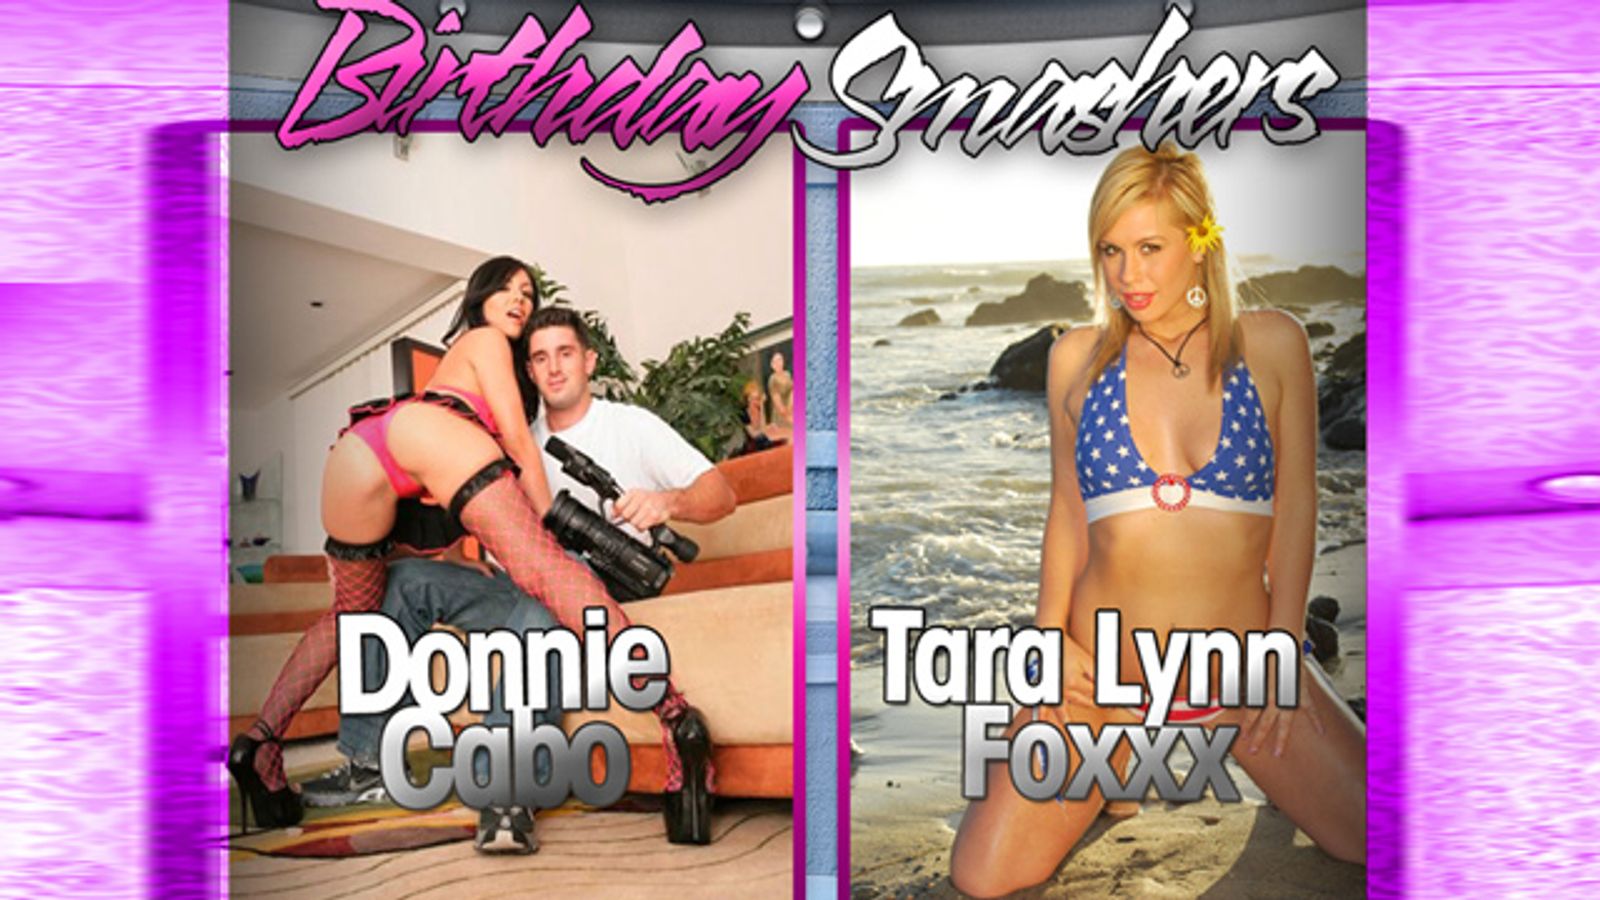 Birthday Party for Tara Lynn Foxx and Donnie Cabo on June 4